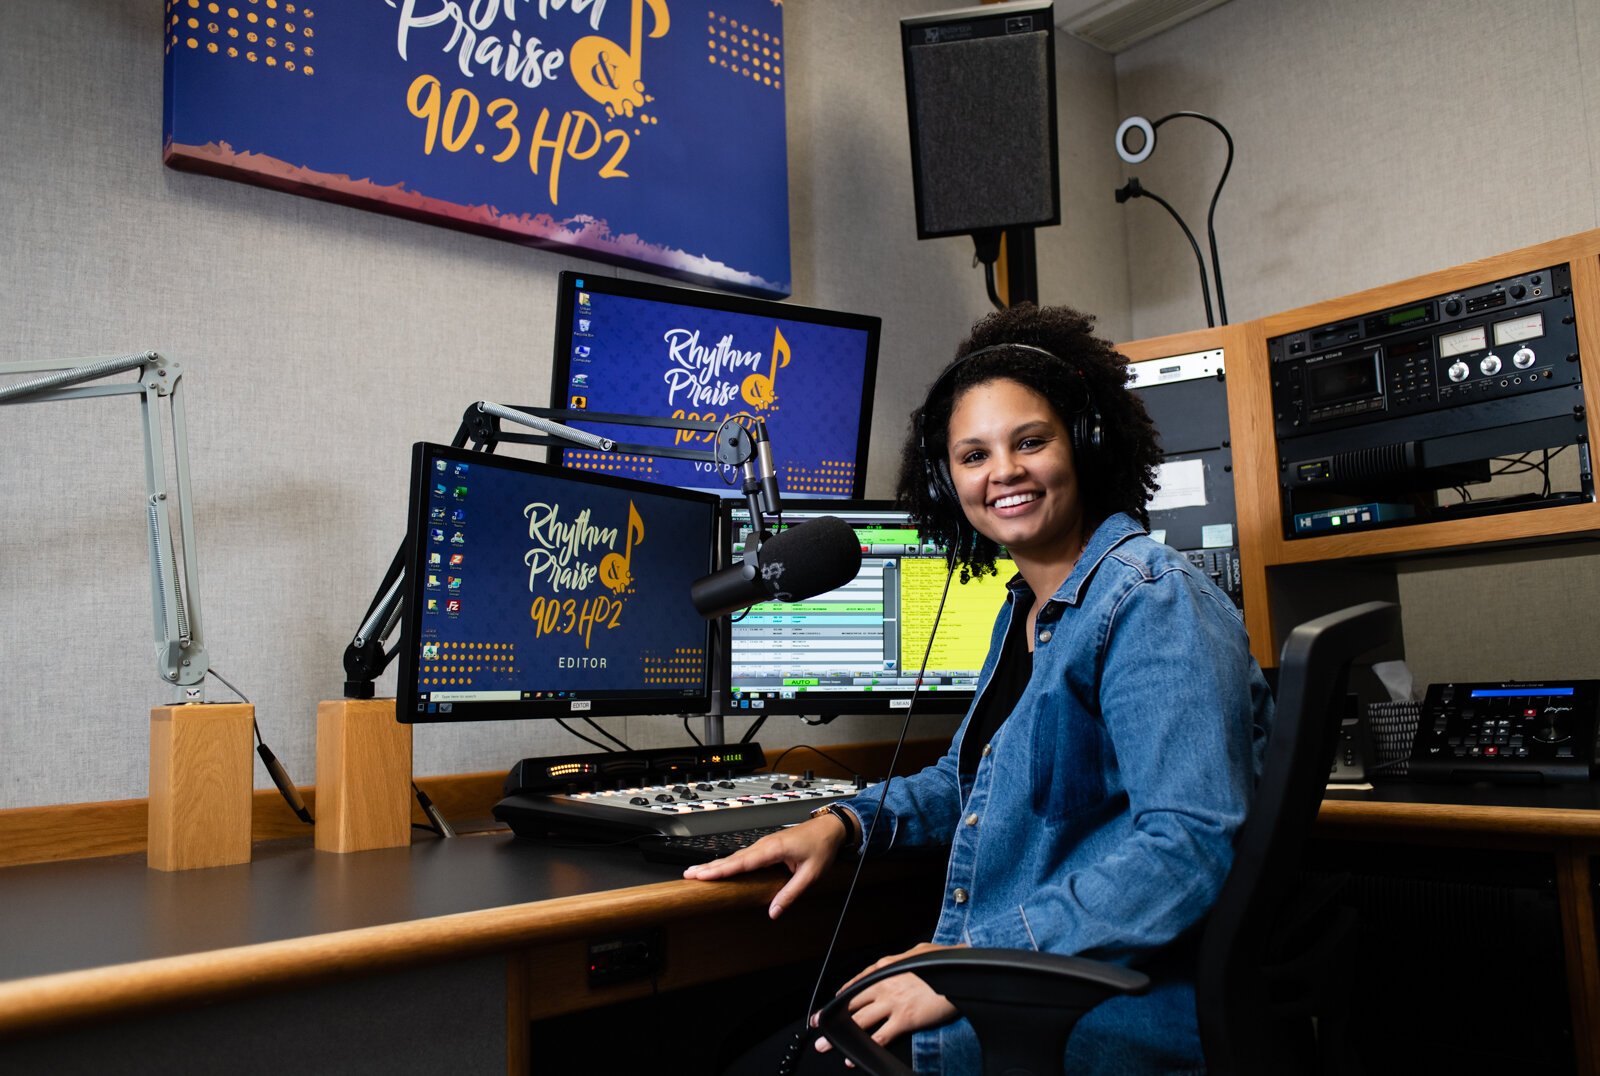 Monique Moss, Program Director/On-Air Personality at Rhythm & Praise 90.3 HD2, works at the station at 1115 W. Rudisill Blvd.